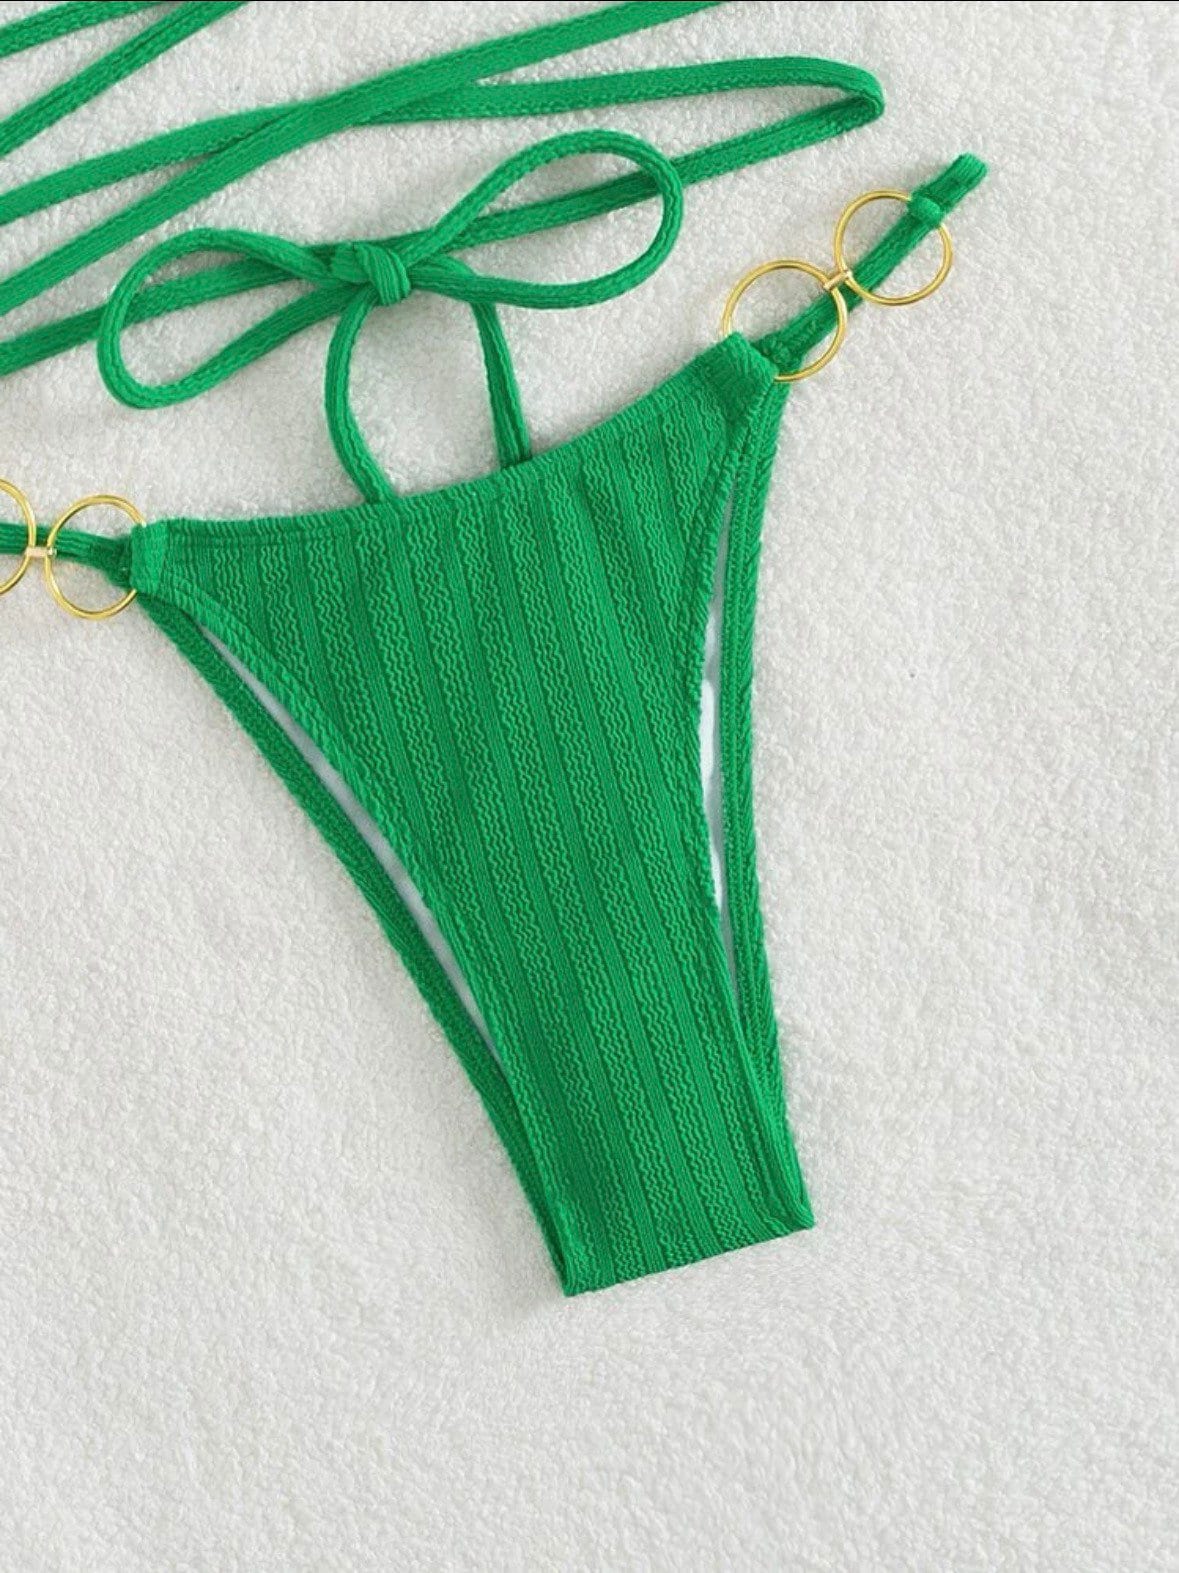 The Tie Me Up Sarah Green swim bikini with tie around strings, gold linked rings, triangle halter top tie, chain ring bottoms swimsuit set